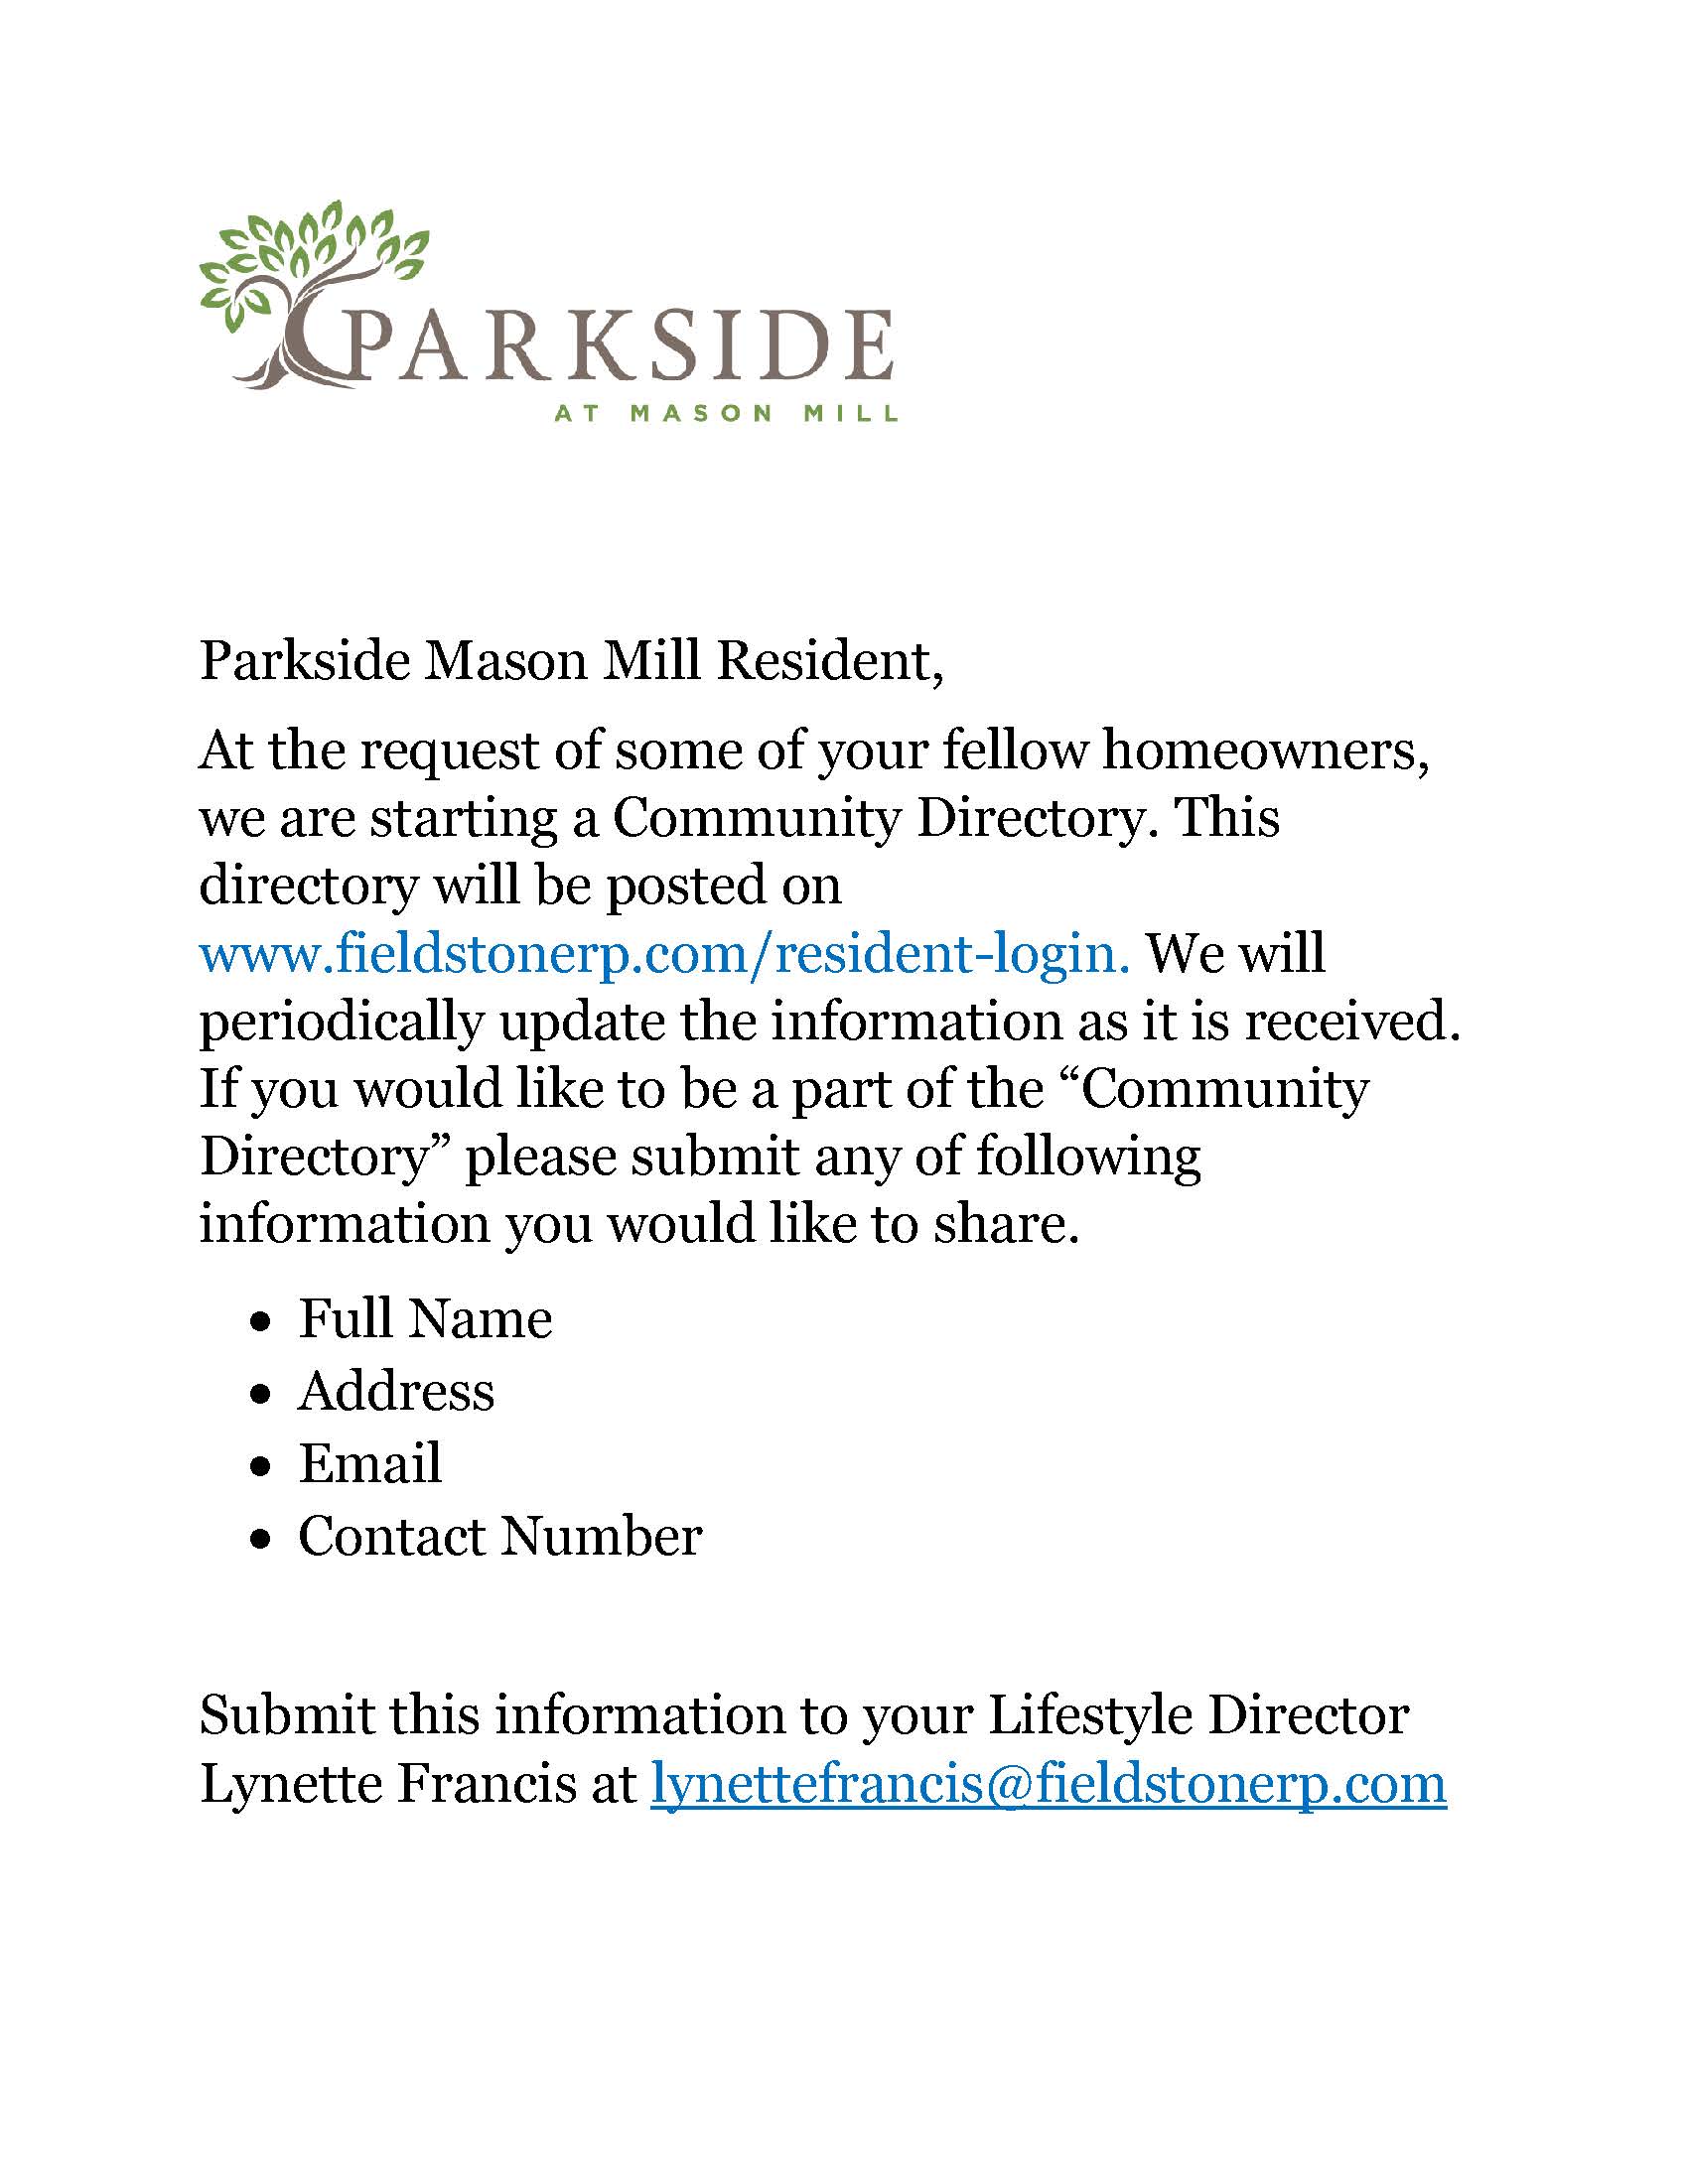 Parkside Community Directory Invite